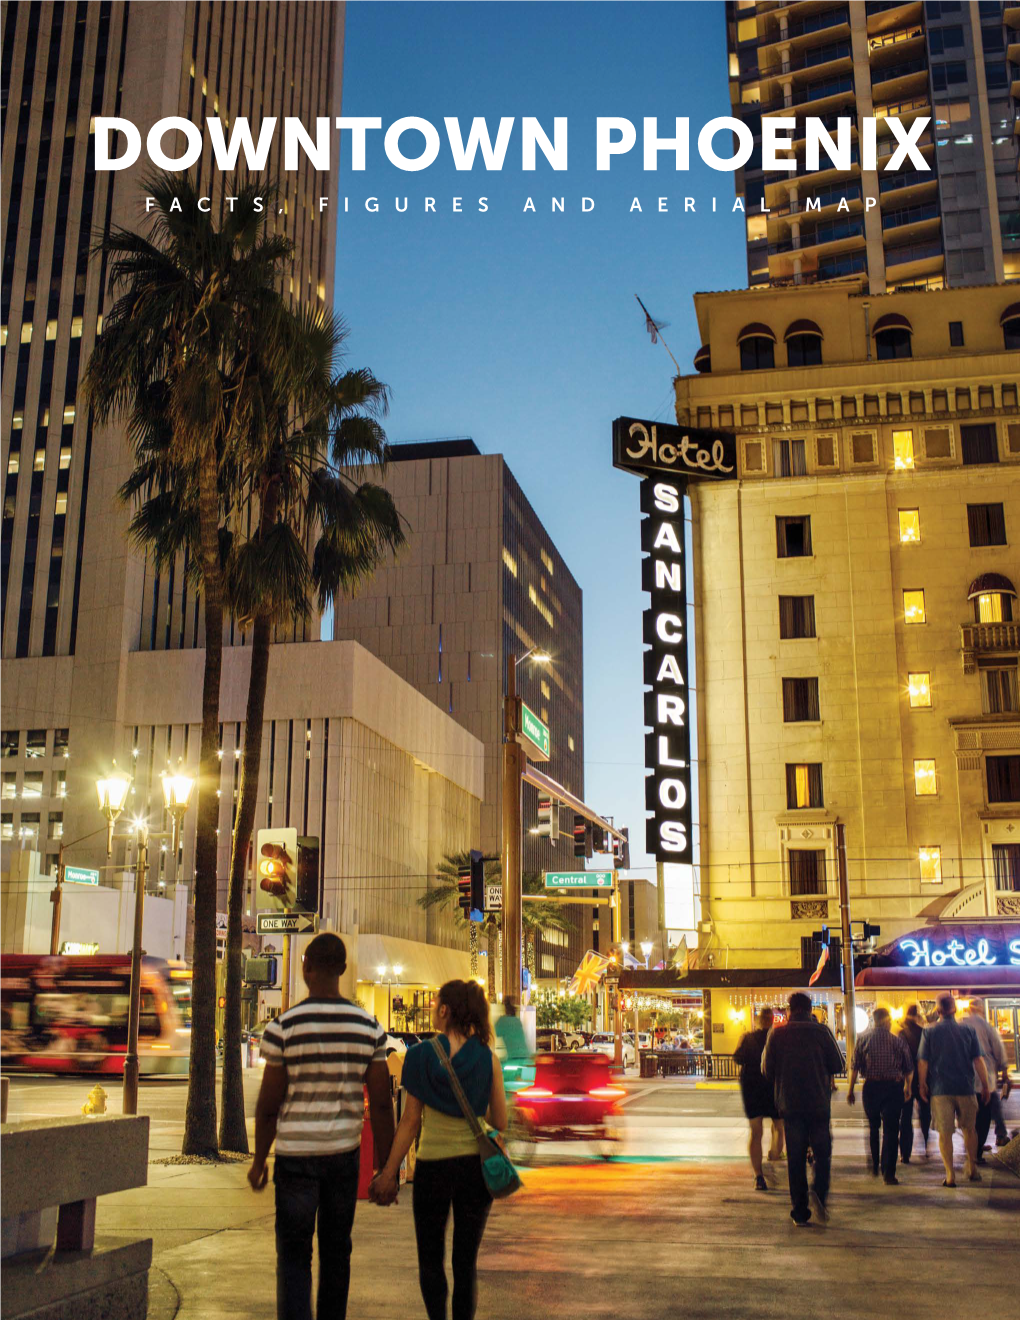 Downtown Phoenix Facts, Figures and Aerial Map the Urban Heart of Arizona